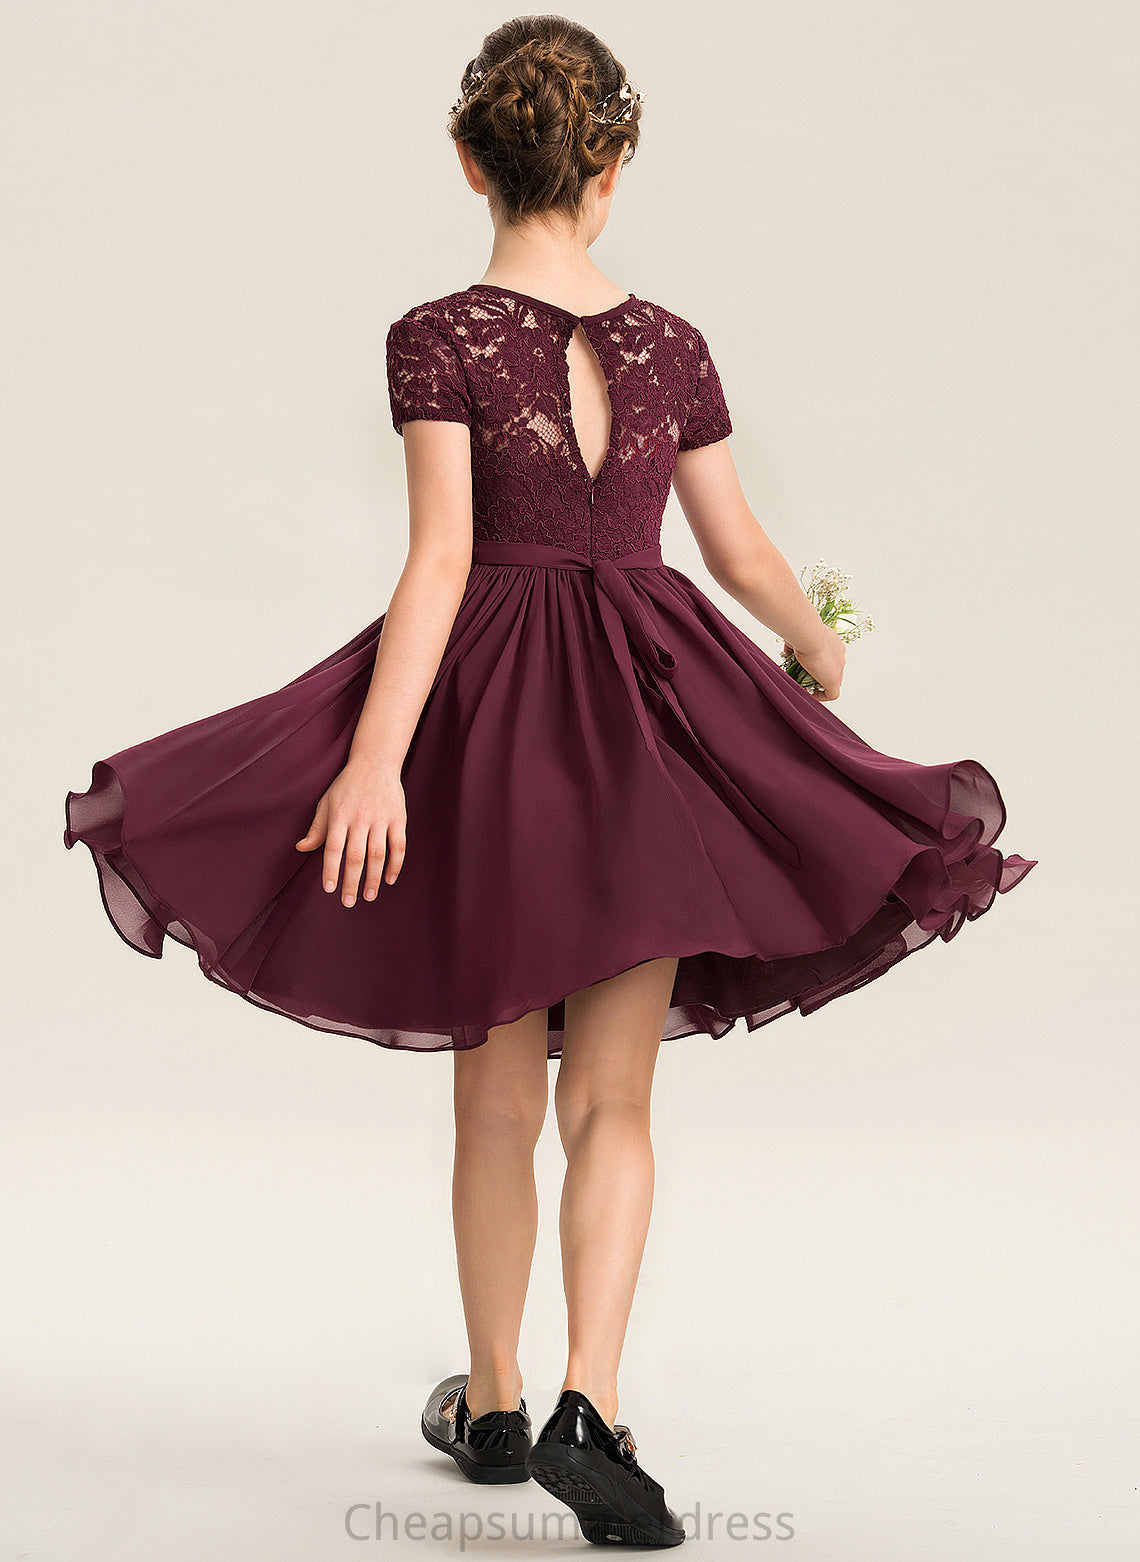 A-Line Junior Bridesmaid Dresses Chiffon Knee-Length Lace Scoop With Neck Bow(s) Aliana